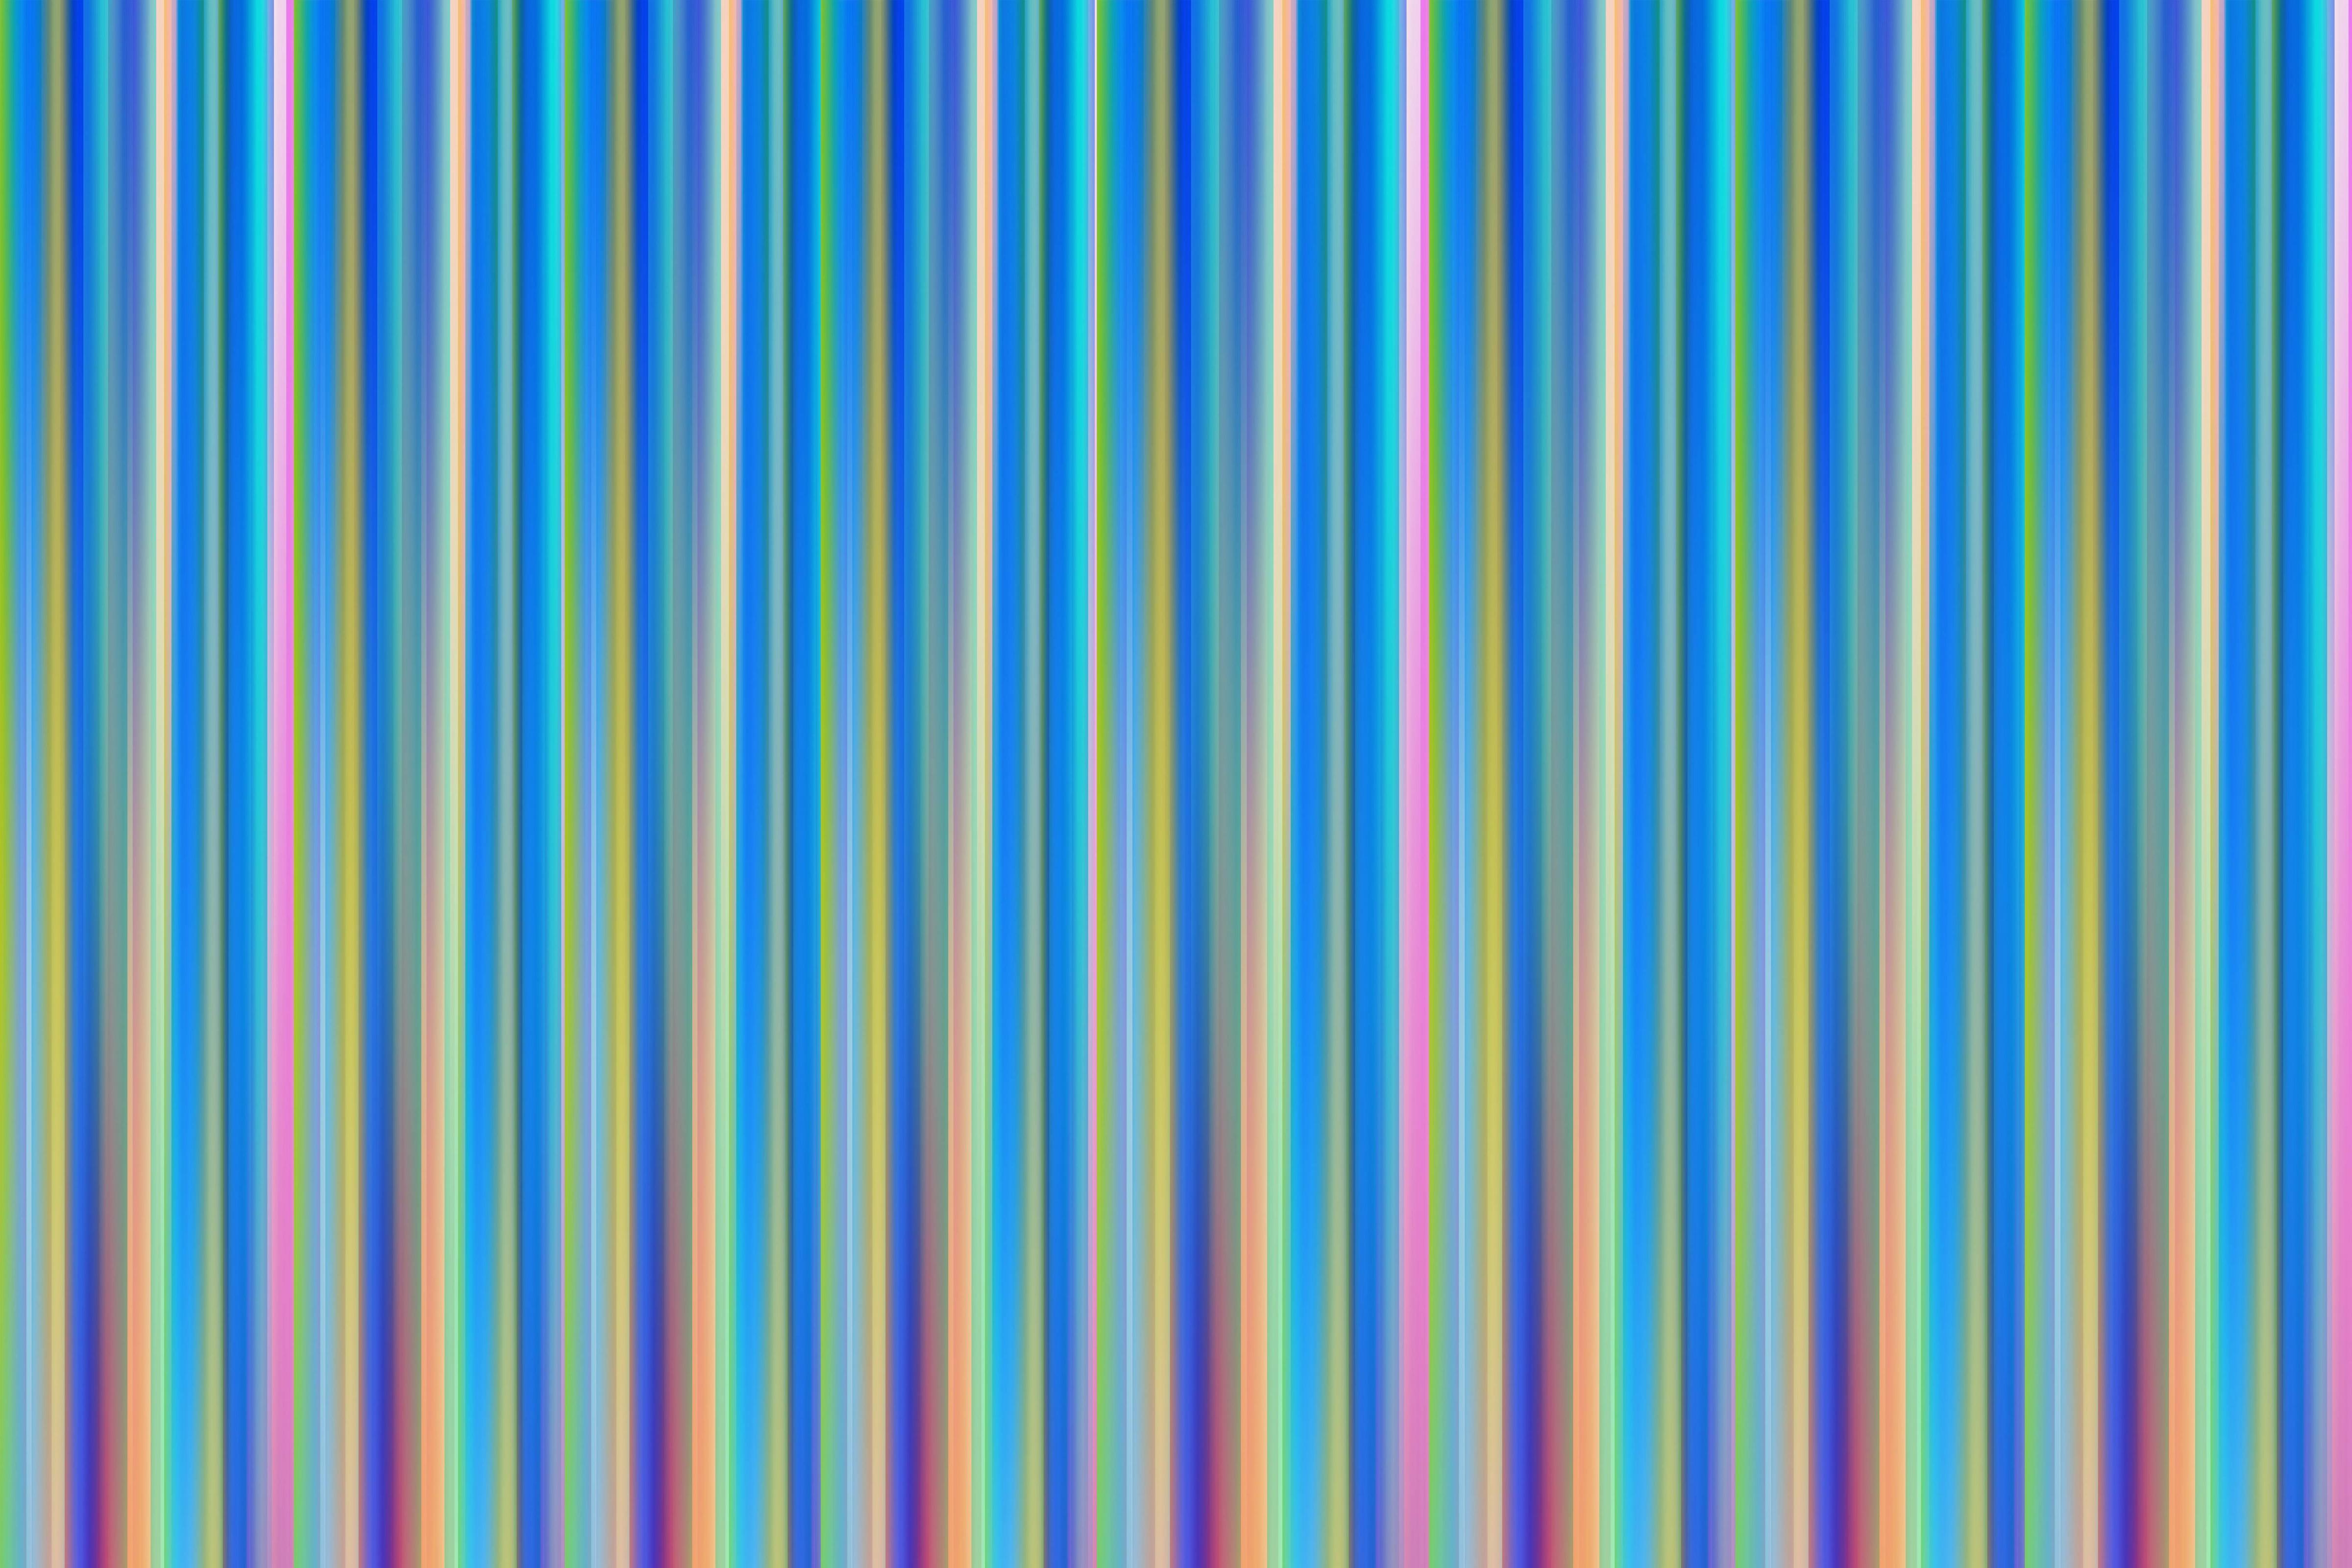 A colorful striped background with lines of different colors - Pattern, colorful